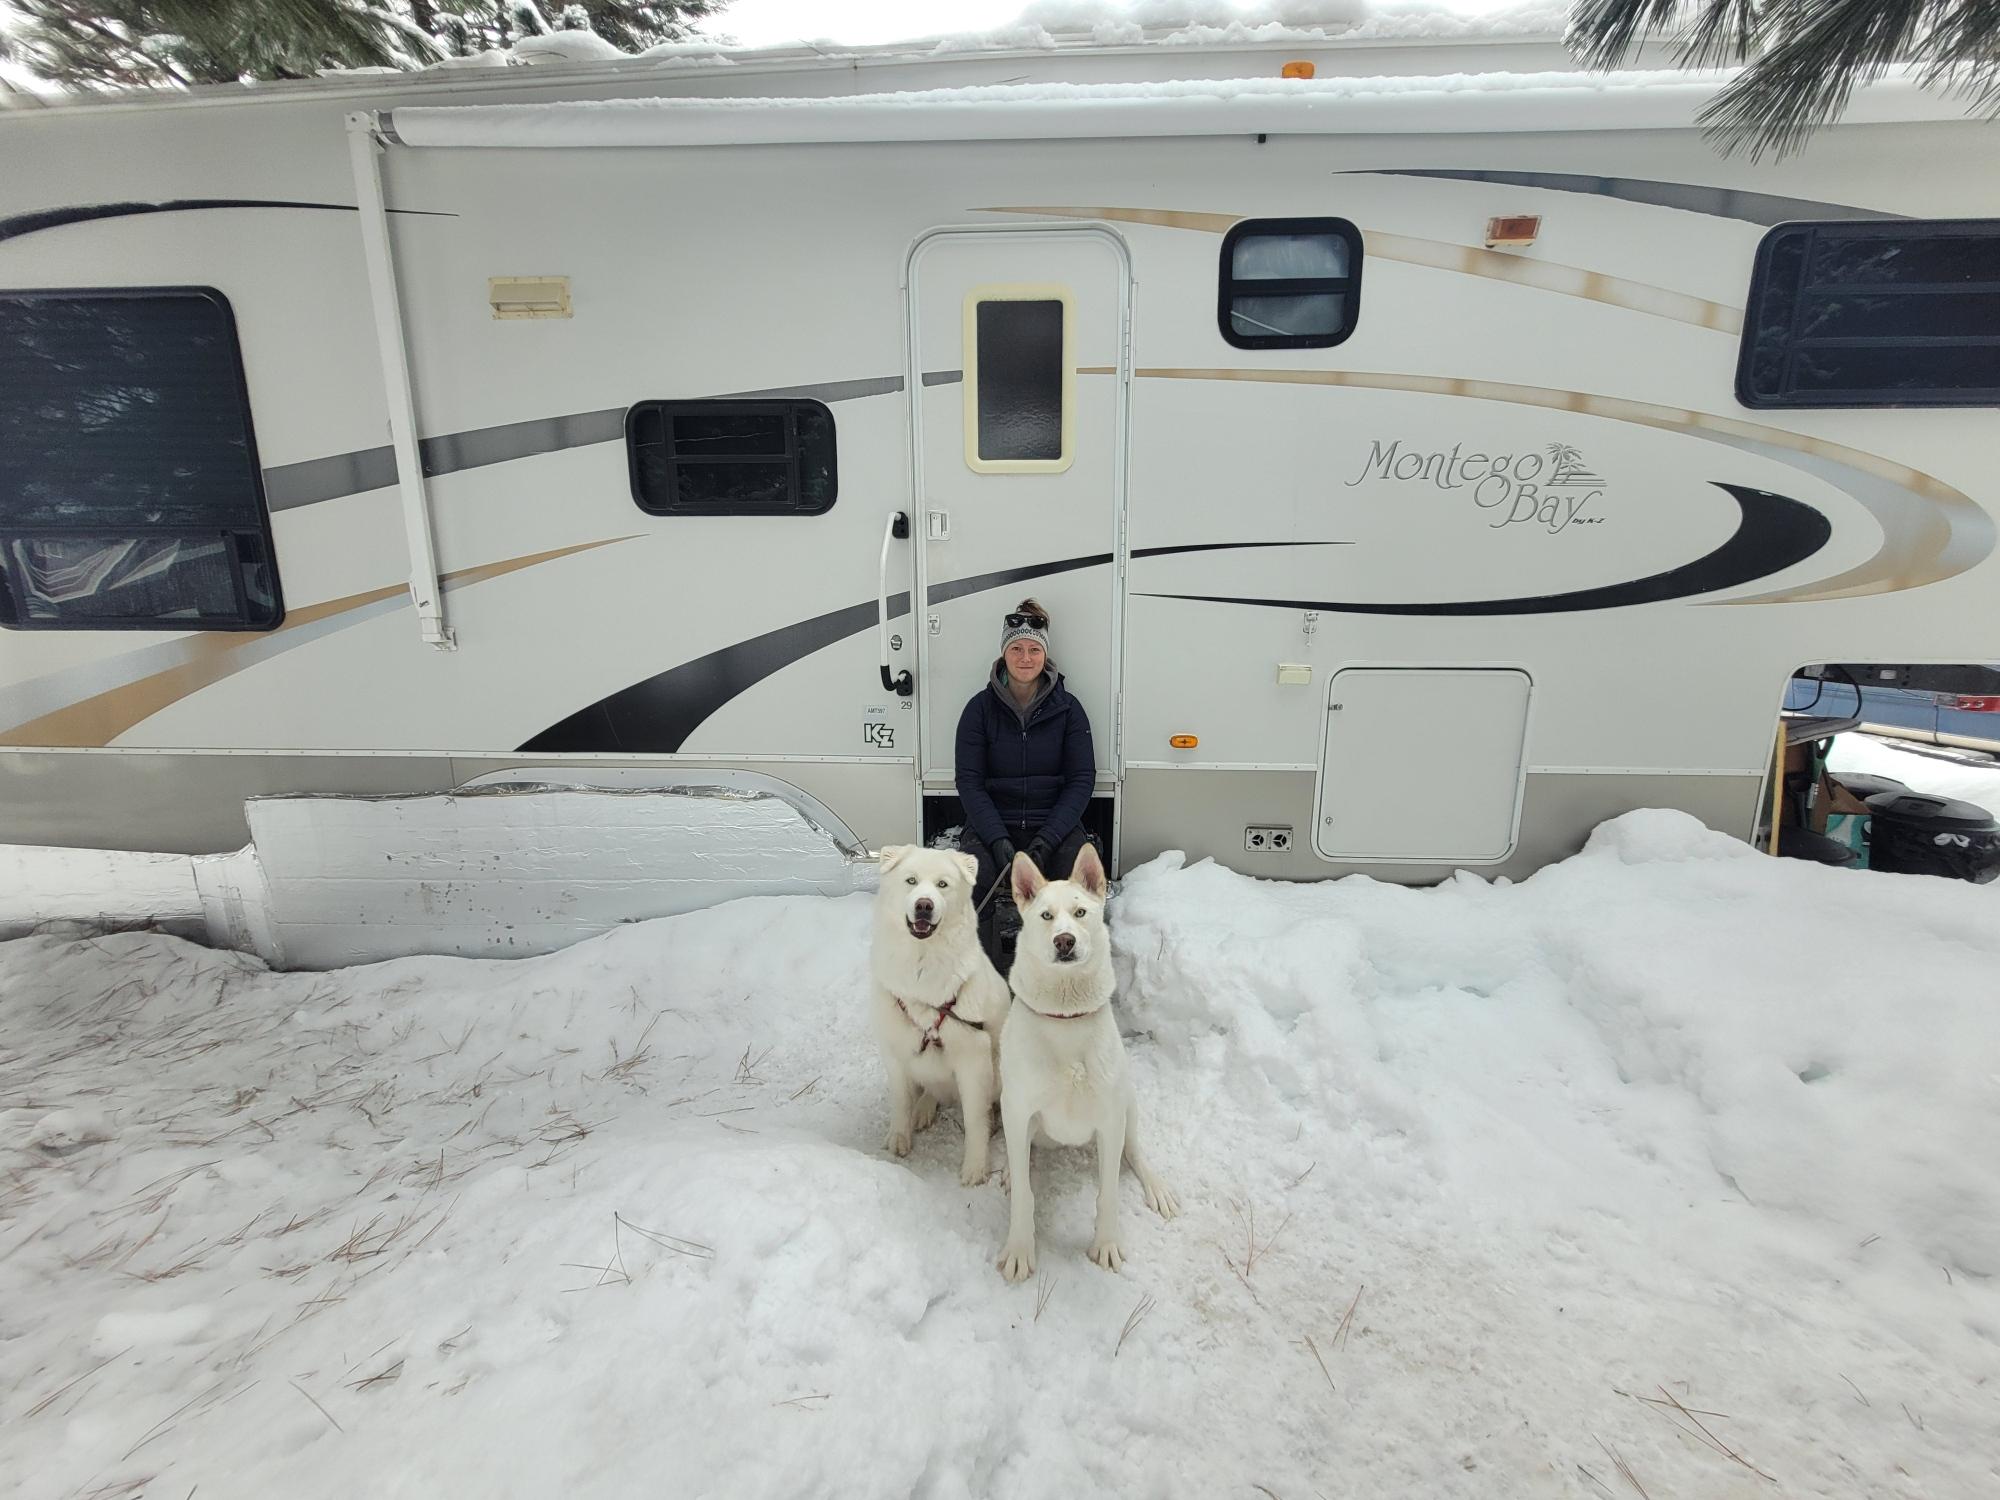 A woman wearing a black coat and winter hat sits on the steps of white RV. Two large white dogs sit in front of her on a snowy, overcast day in McCall, Idaho.